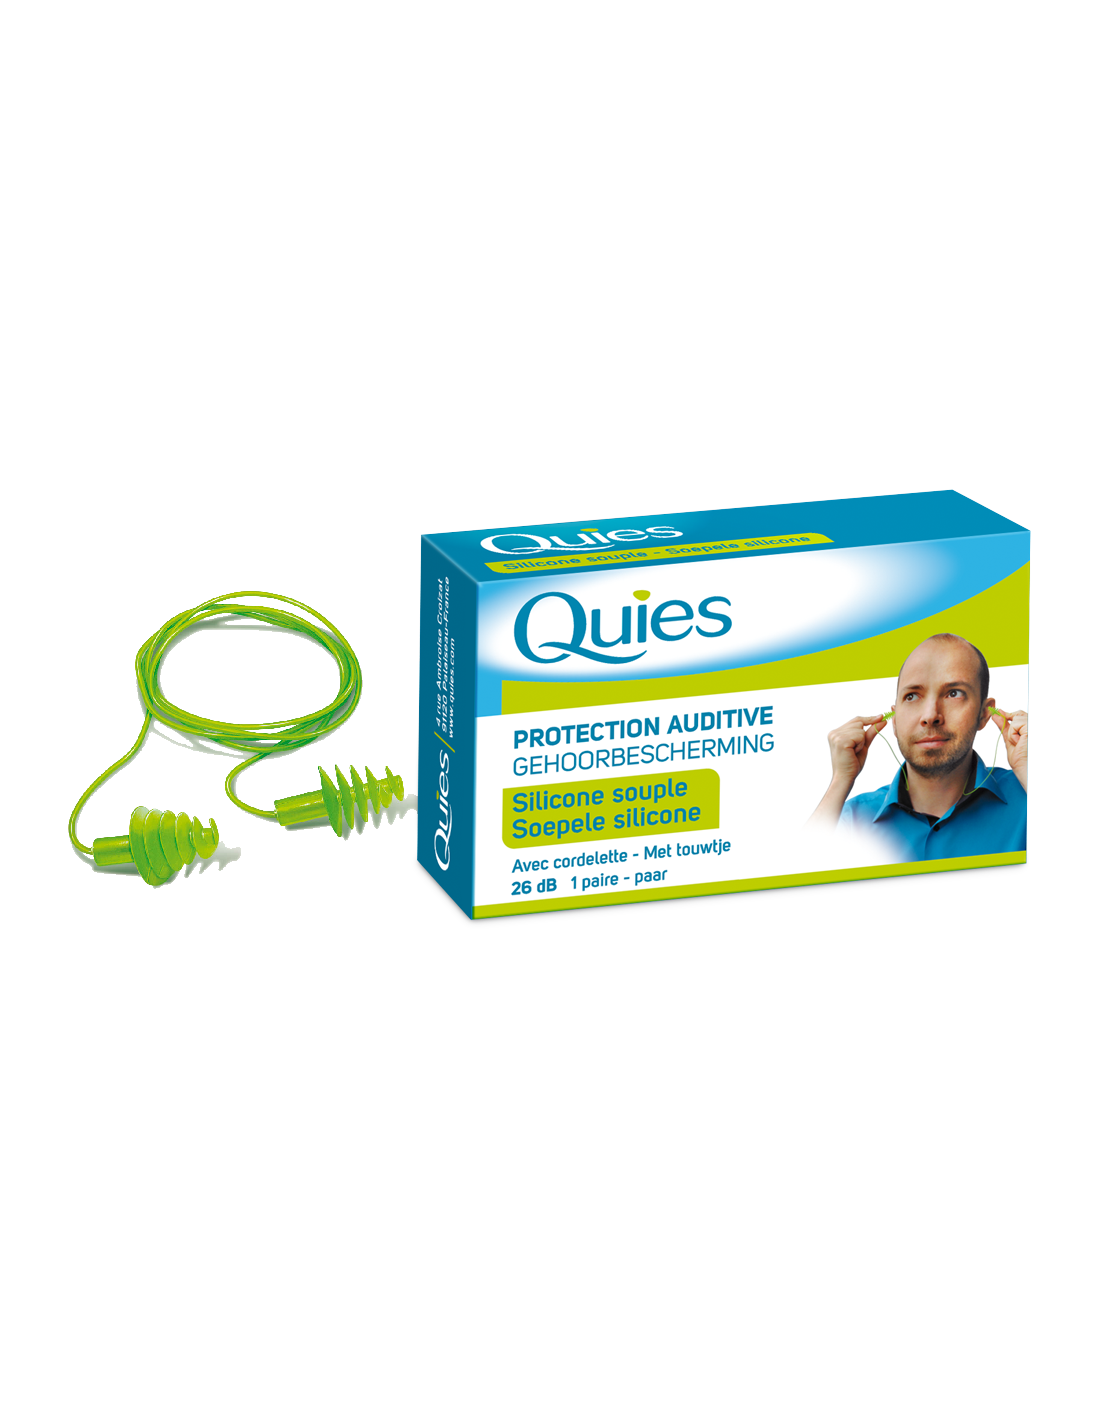 QUIES PROTECTION AUDITIVE SILICONE SOUPLE 26DB